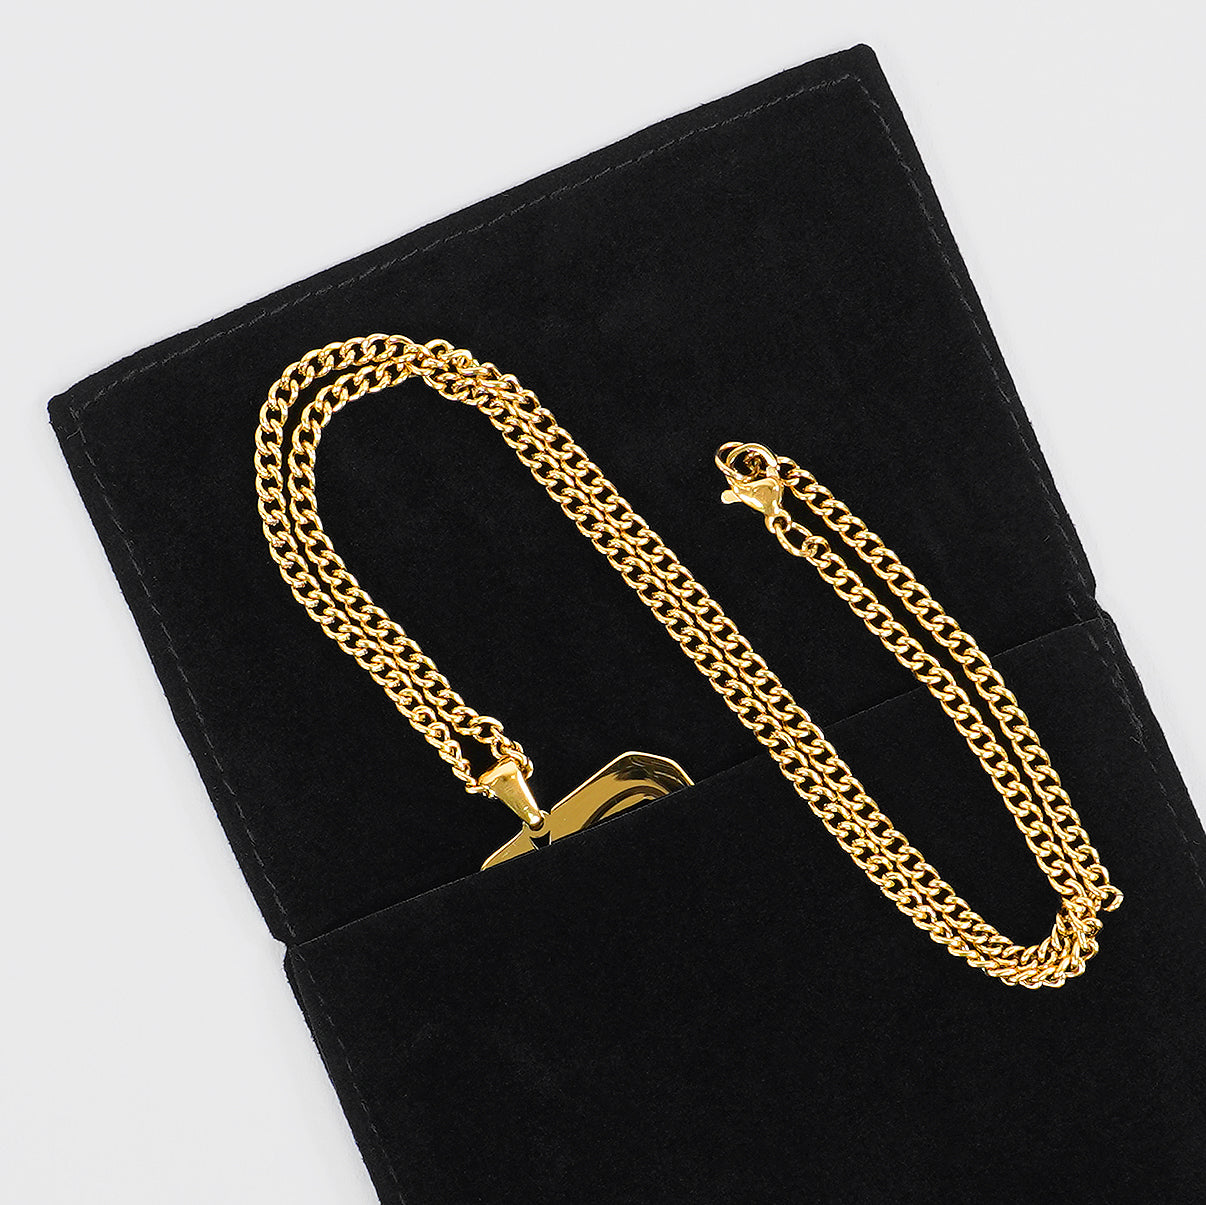 8 Number Pendant with Chain Necklace - Gold Plated Stainless Steel